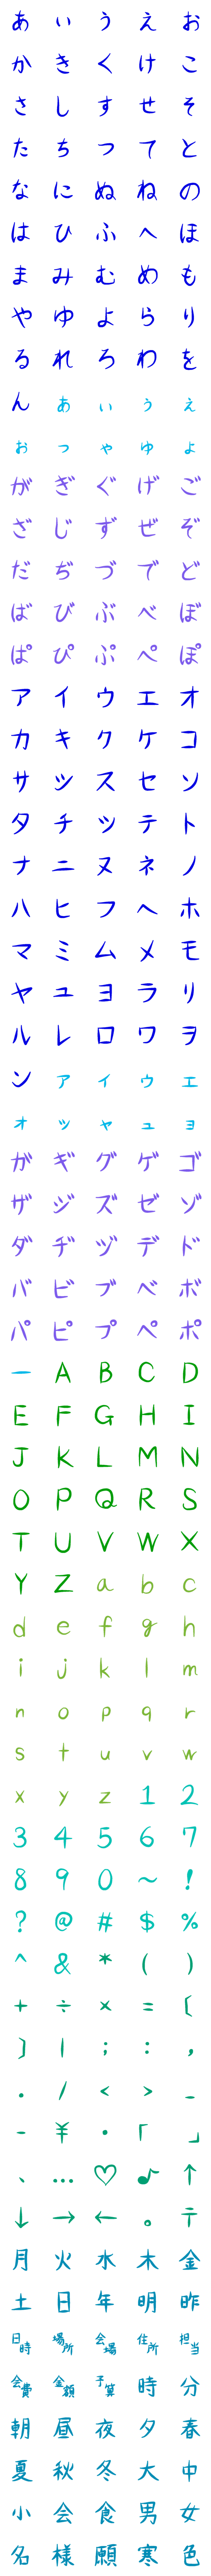 [LINE絵文字]寒色文字セットの画像一覧